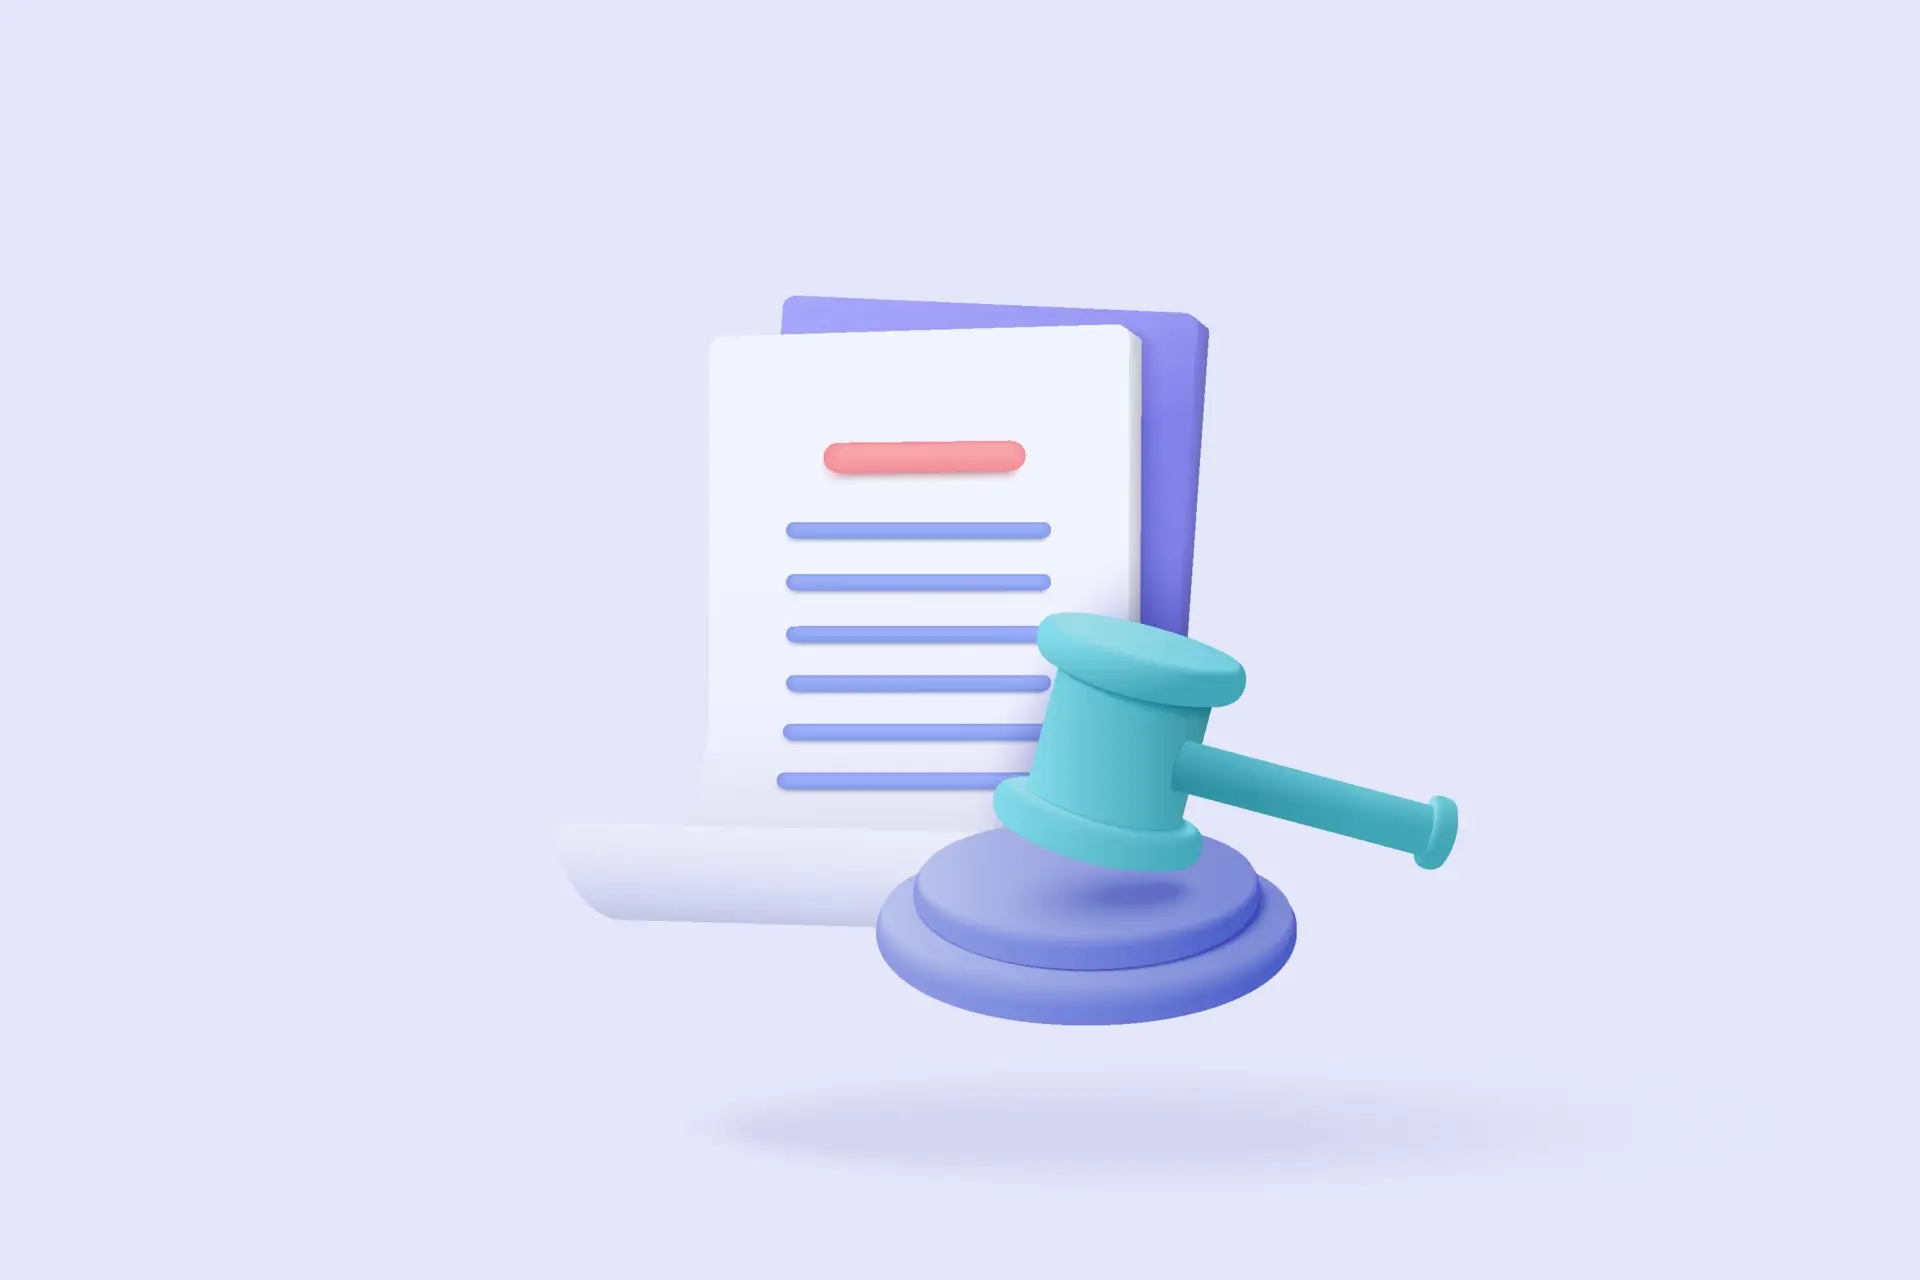 3d-judge-hammer-minimal-gavel-concept-of-law-icon-on-paper-clipboard-background-professional-lawyer-punishment-judgement-law-advisor-advocate-judge-arbitrate-courthouse-concept-3d-render-vector